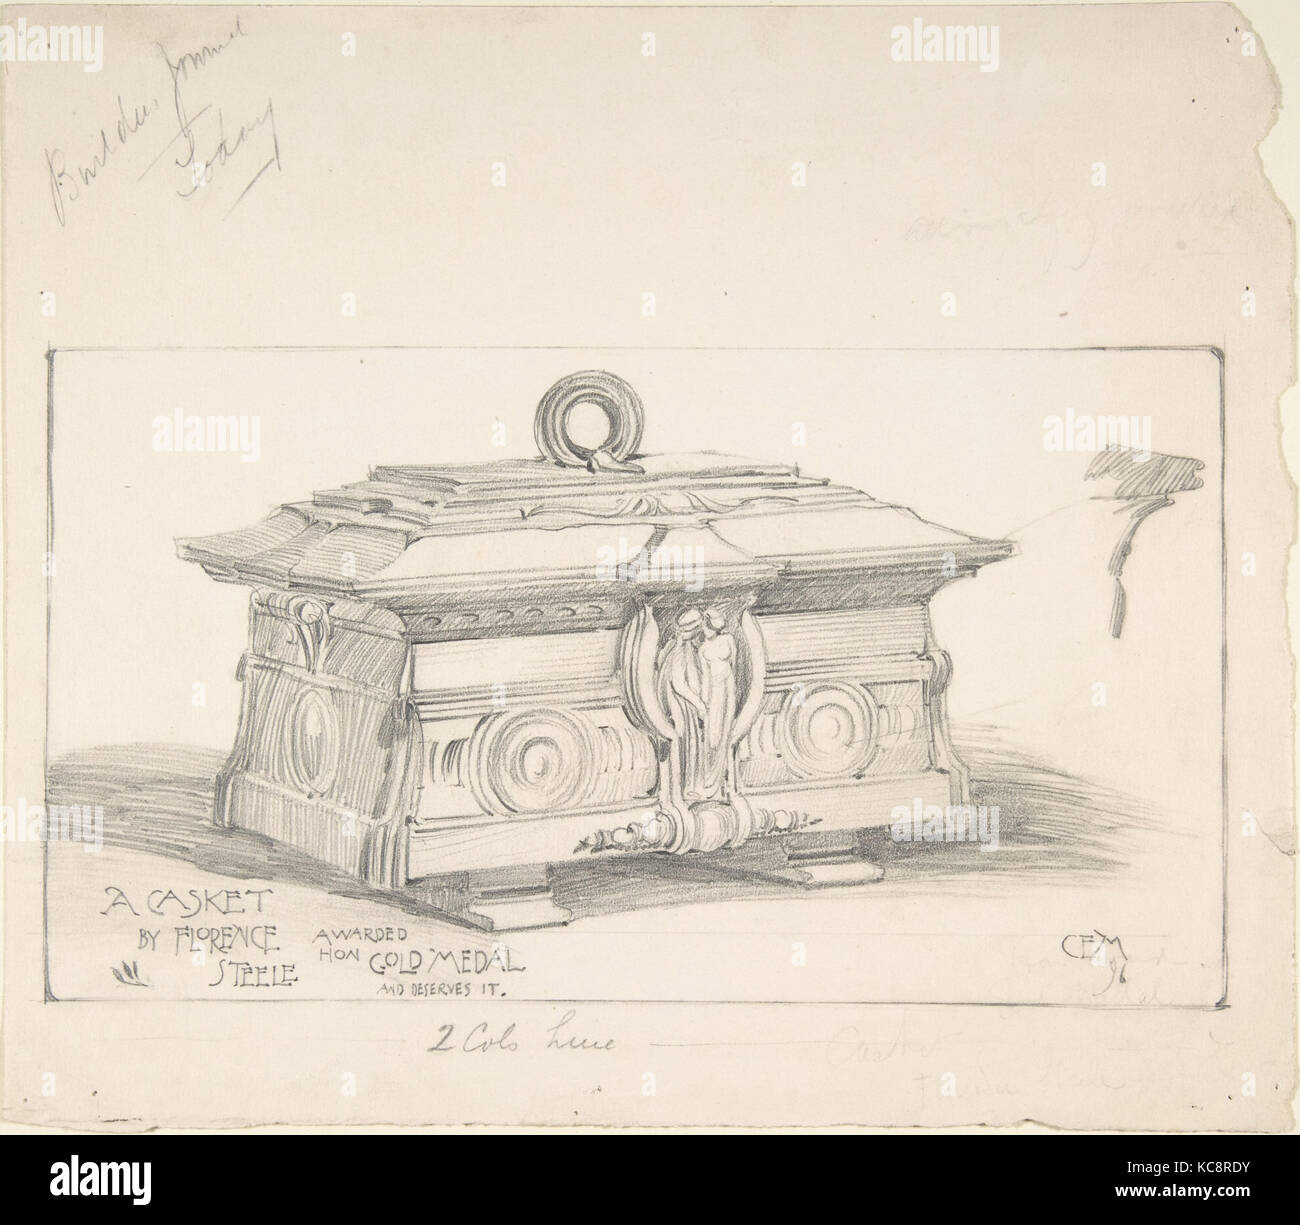 Design for a Casket in Gold Metal, for the Builder's Journal, C. E. M., 1896 Stock Photo